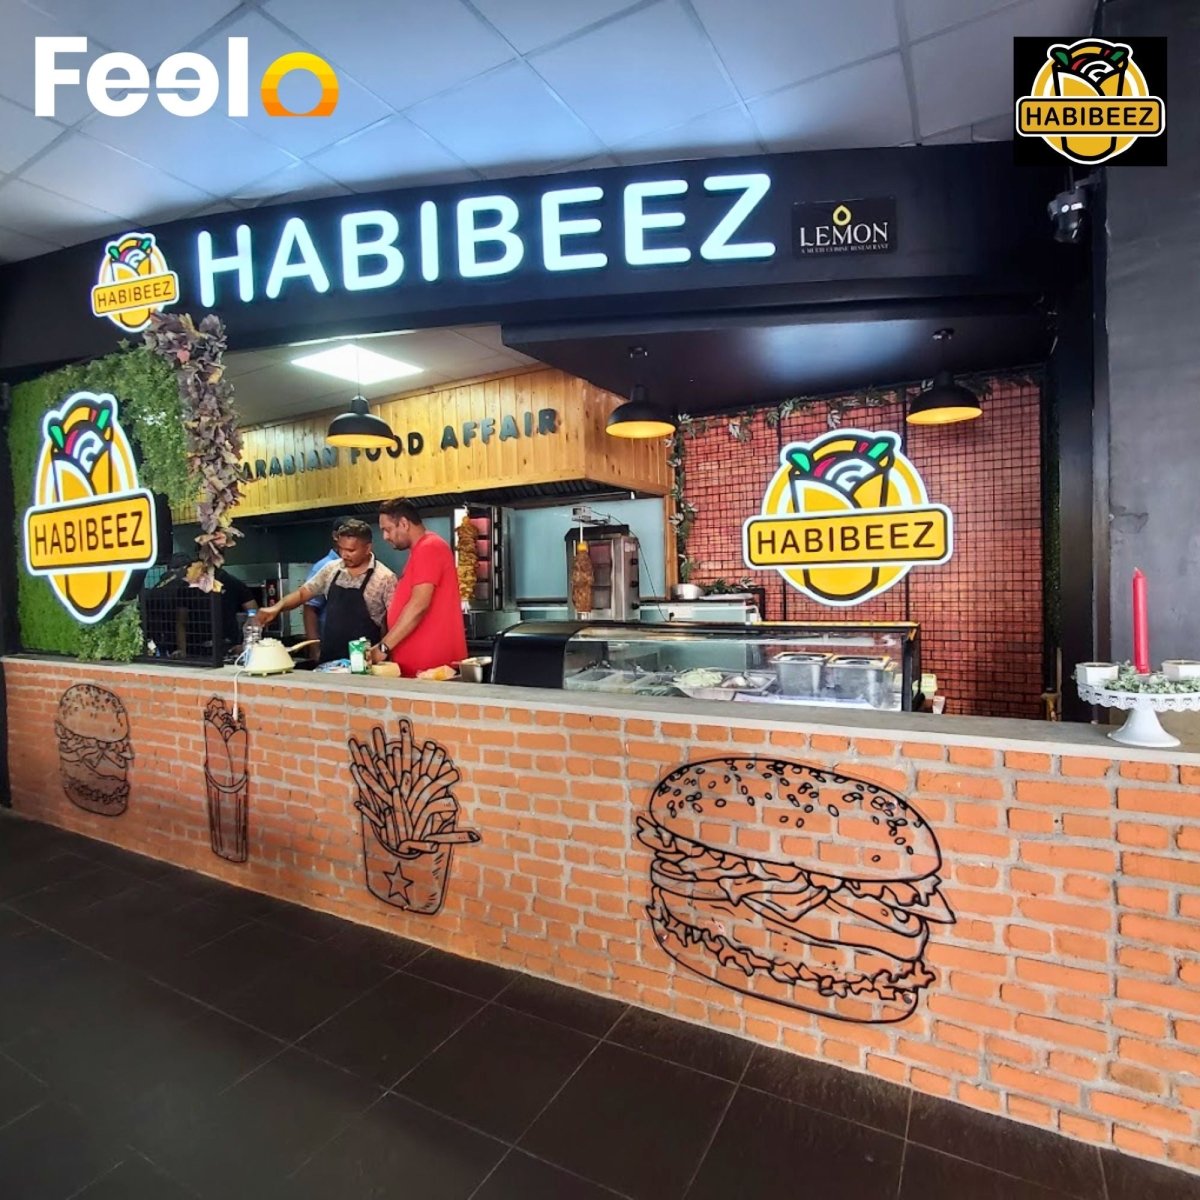 1x Delicious Habibeez Special Chips with Cheese and Meat of your choice - Habibeez, Colombo 02 | Feelo